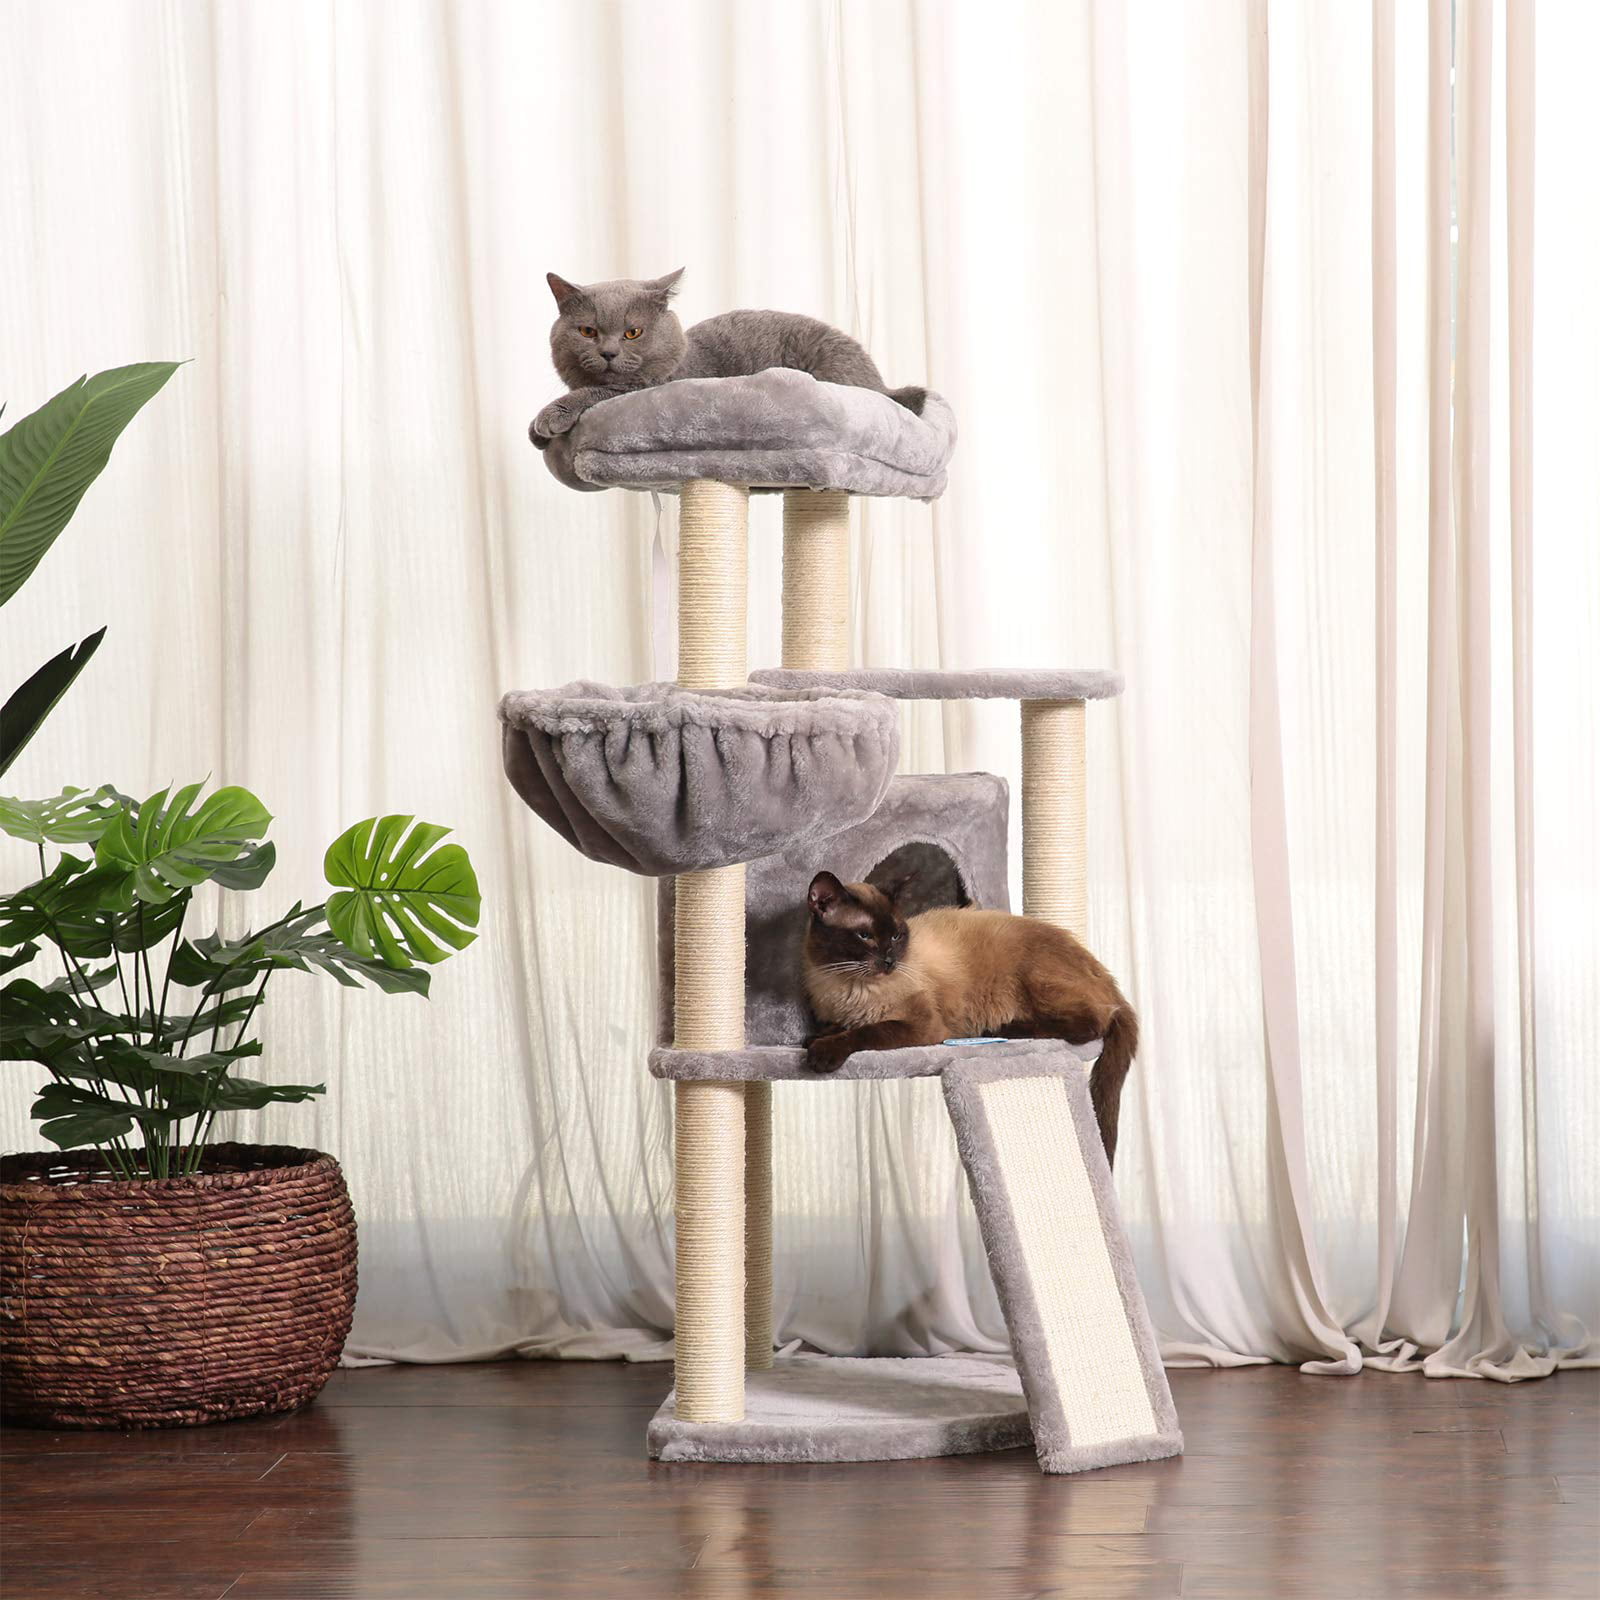 2 Perch Hammock 2 Bigger Plush Condos Hey-bro Extra Large Multi-Level Cat Tree Condo Furniture with Sisal-Covered Scratching Posts Scratching Posts Smoky Gray MPJ031G 